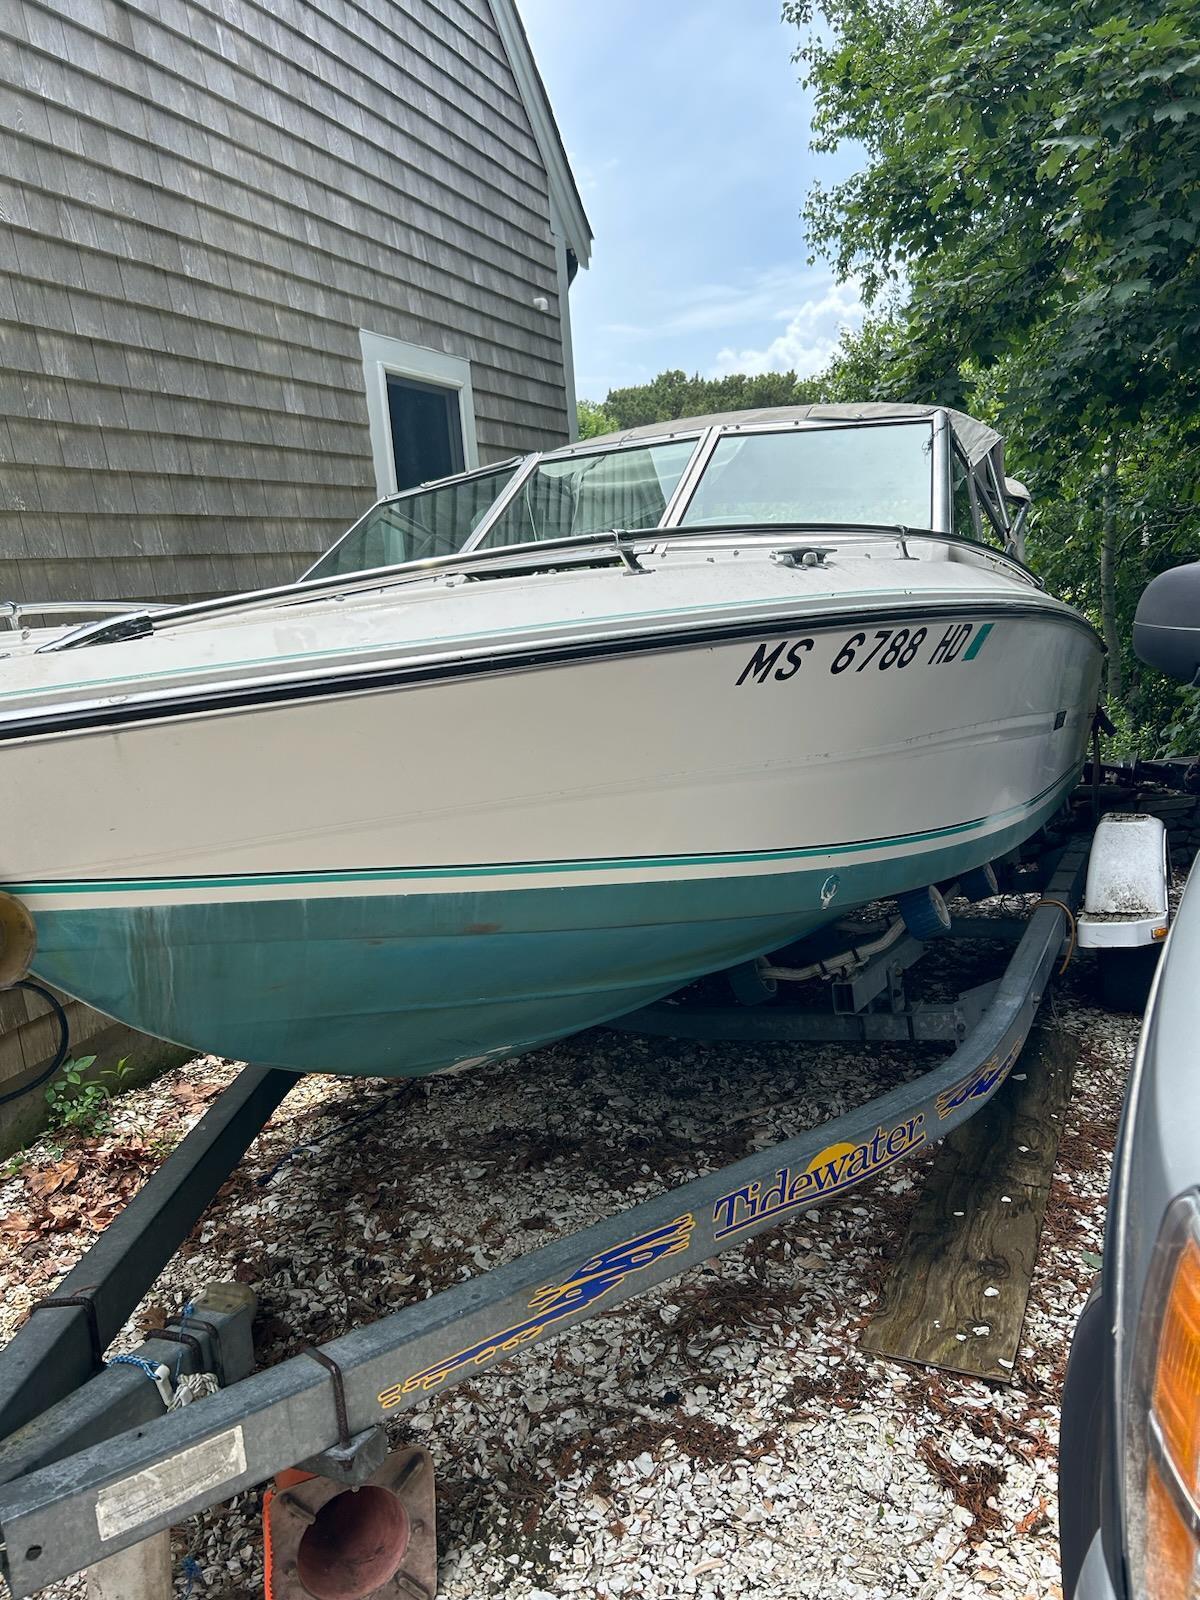 1990 Stingray 17' Boat Located In Chatham, MA - Has Trailer 1990